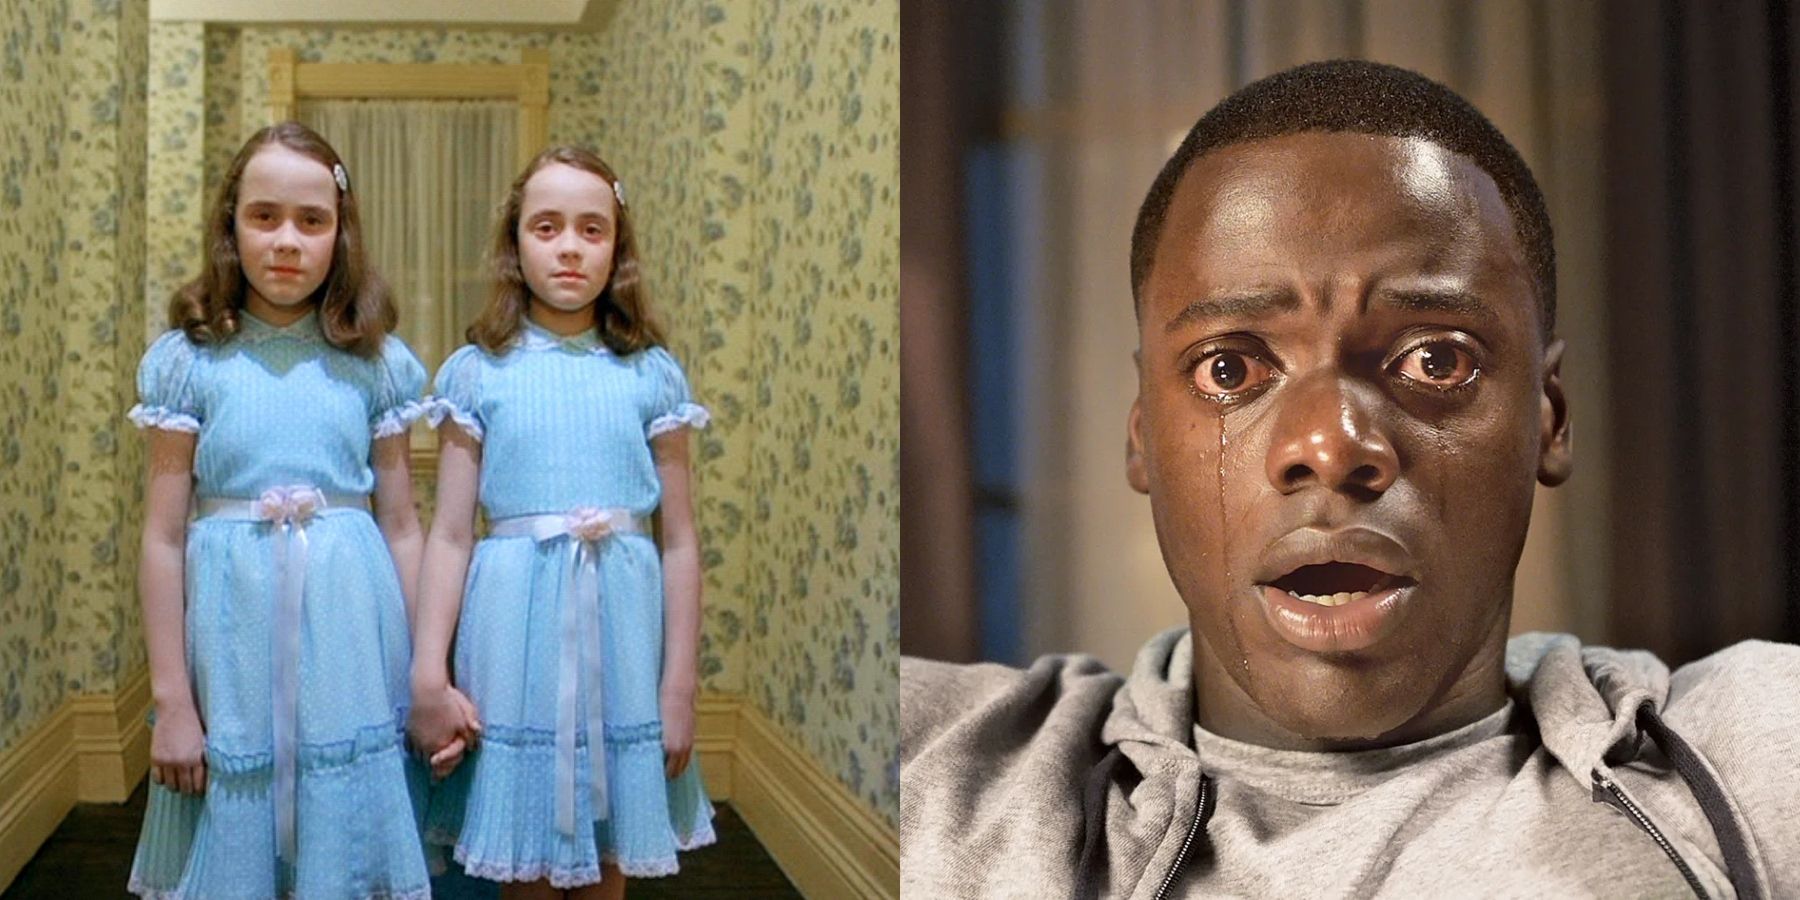 Split image of the twins in The Shining and Daniel Kaluuya as Chris in Get Out